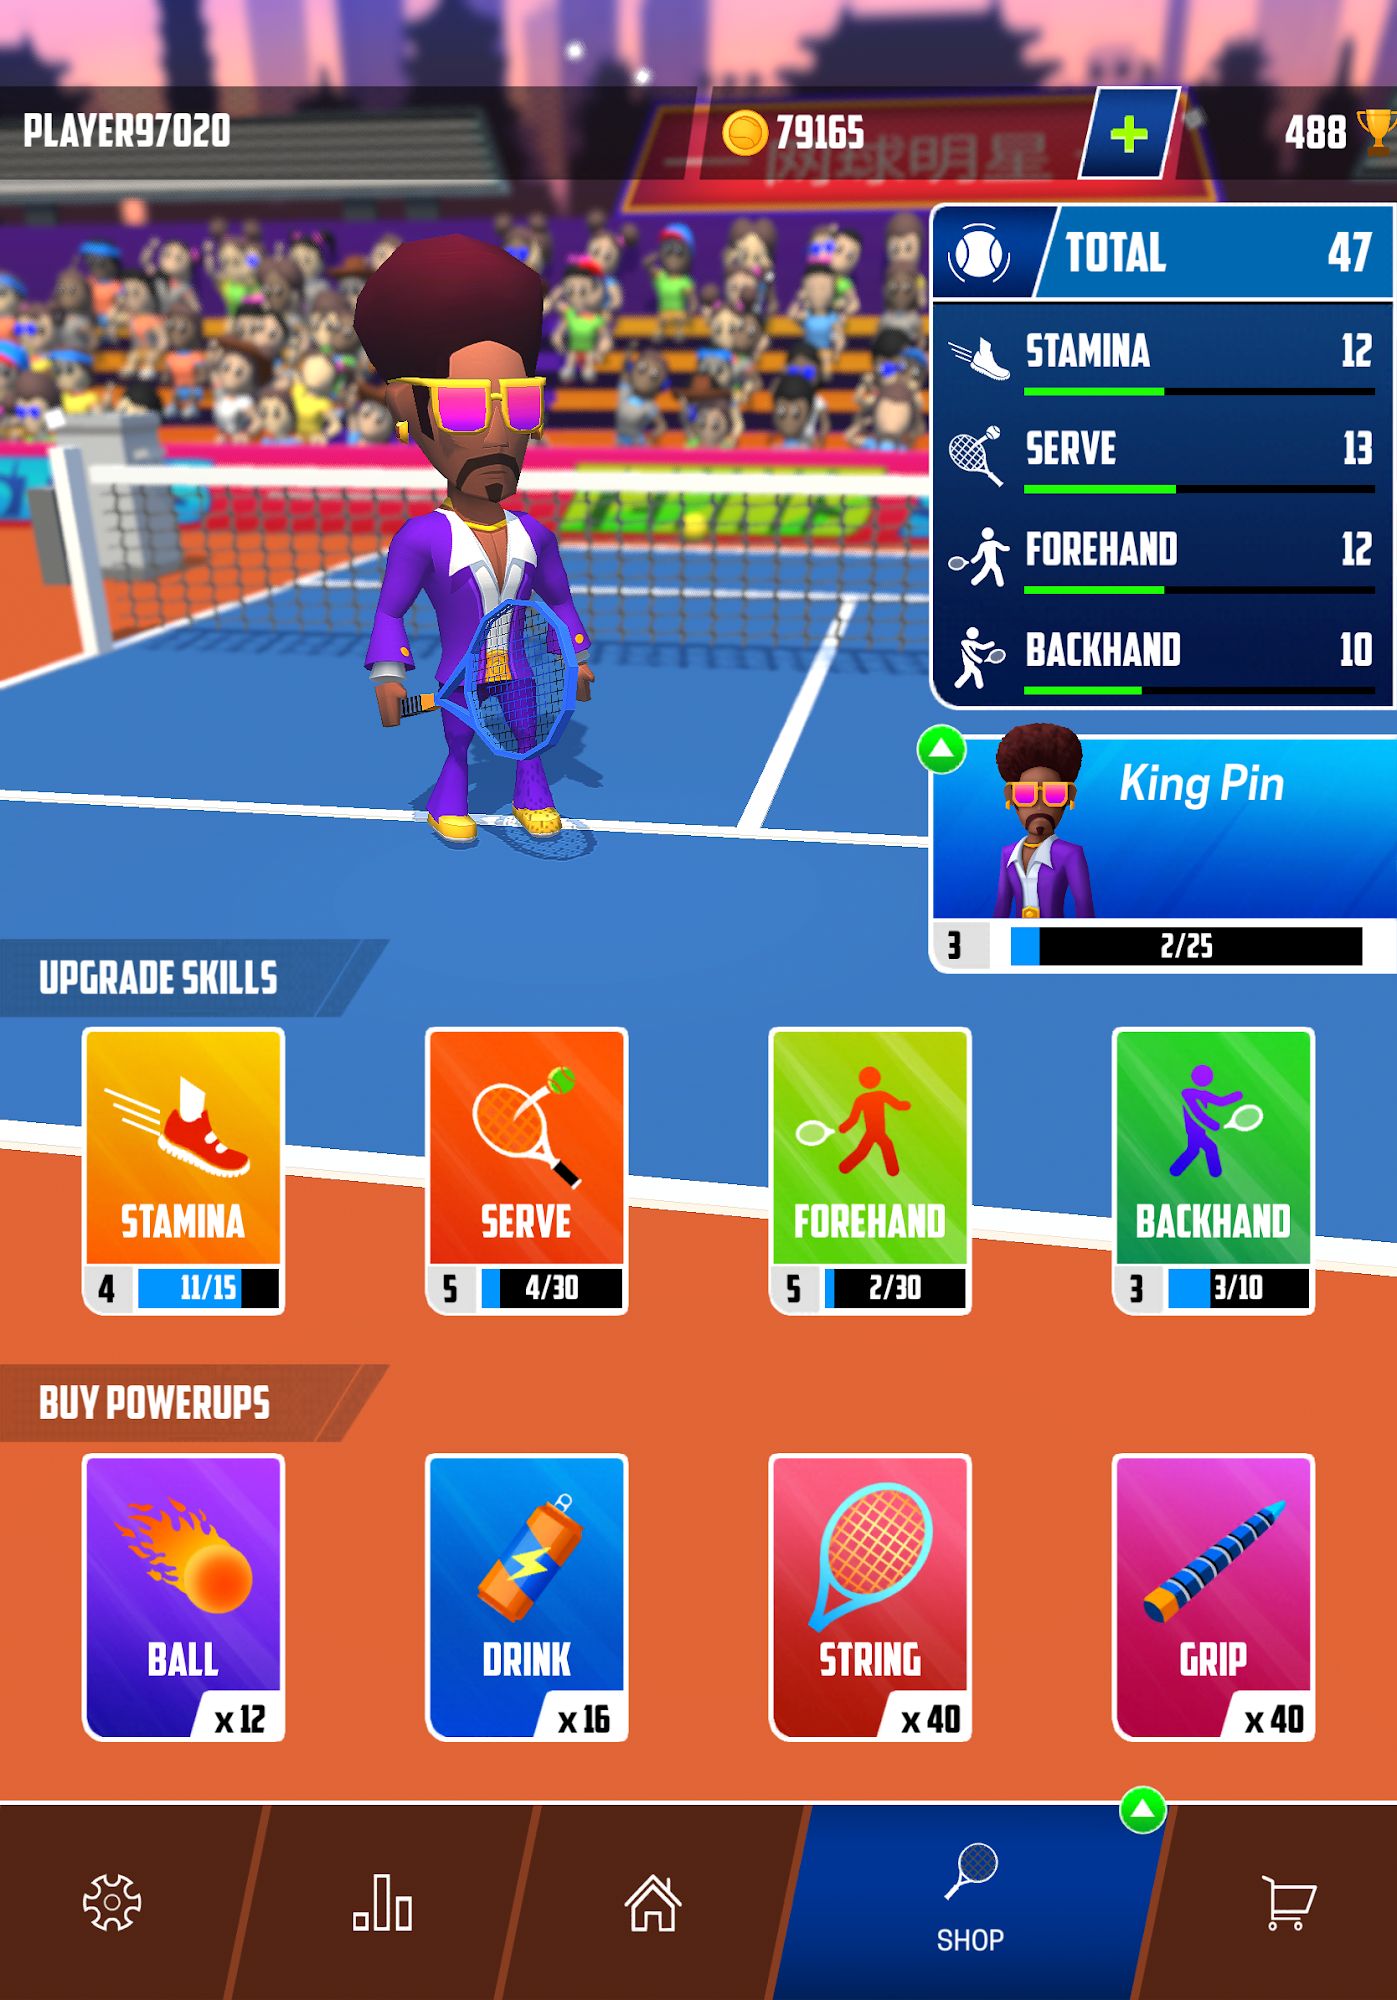 Tennis Stars: Ultimate Clash for Android